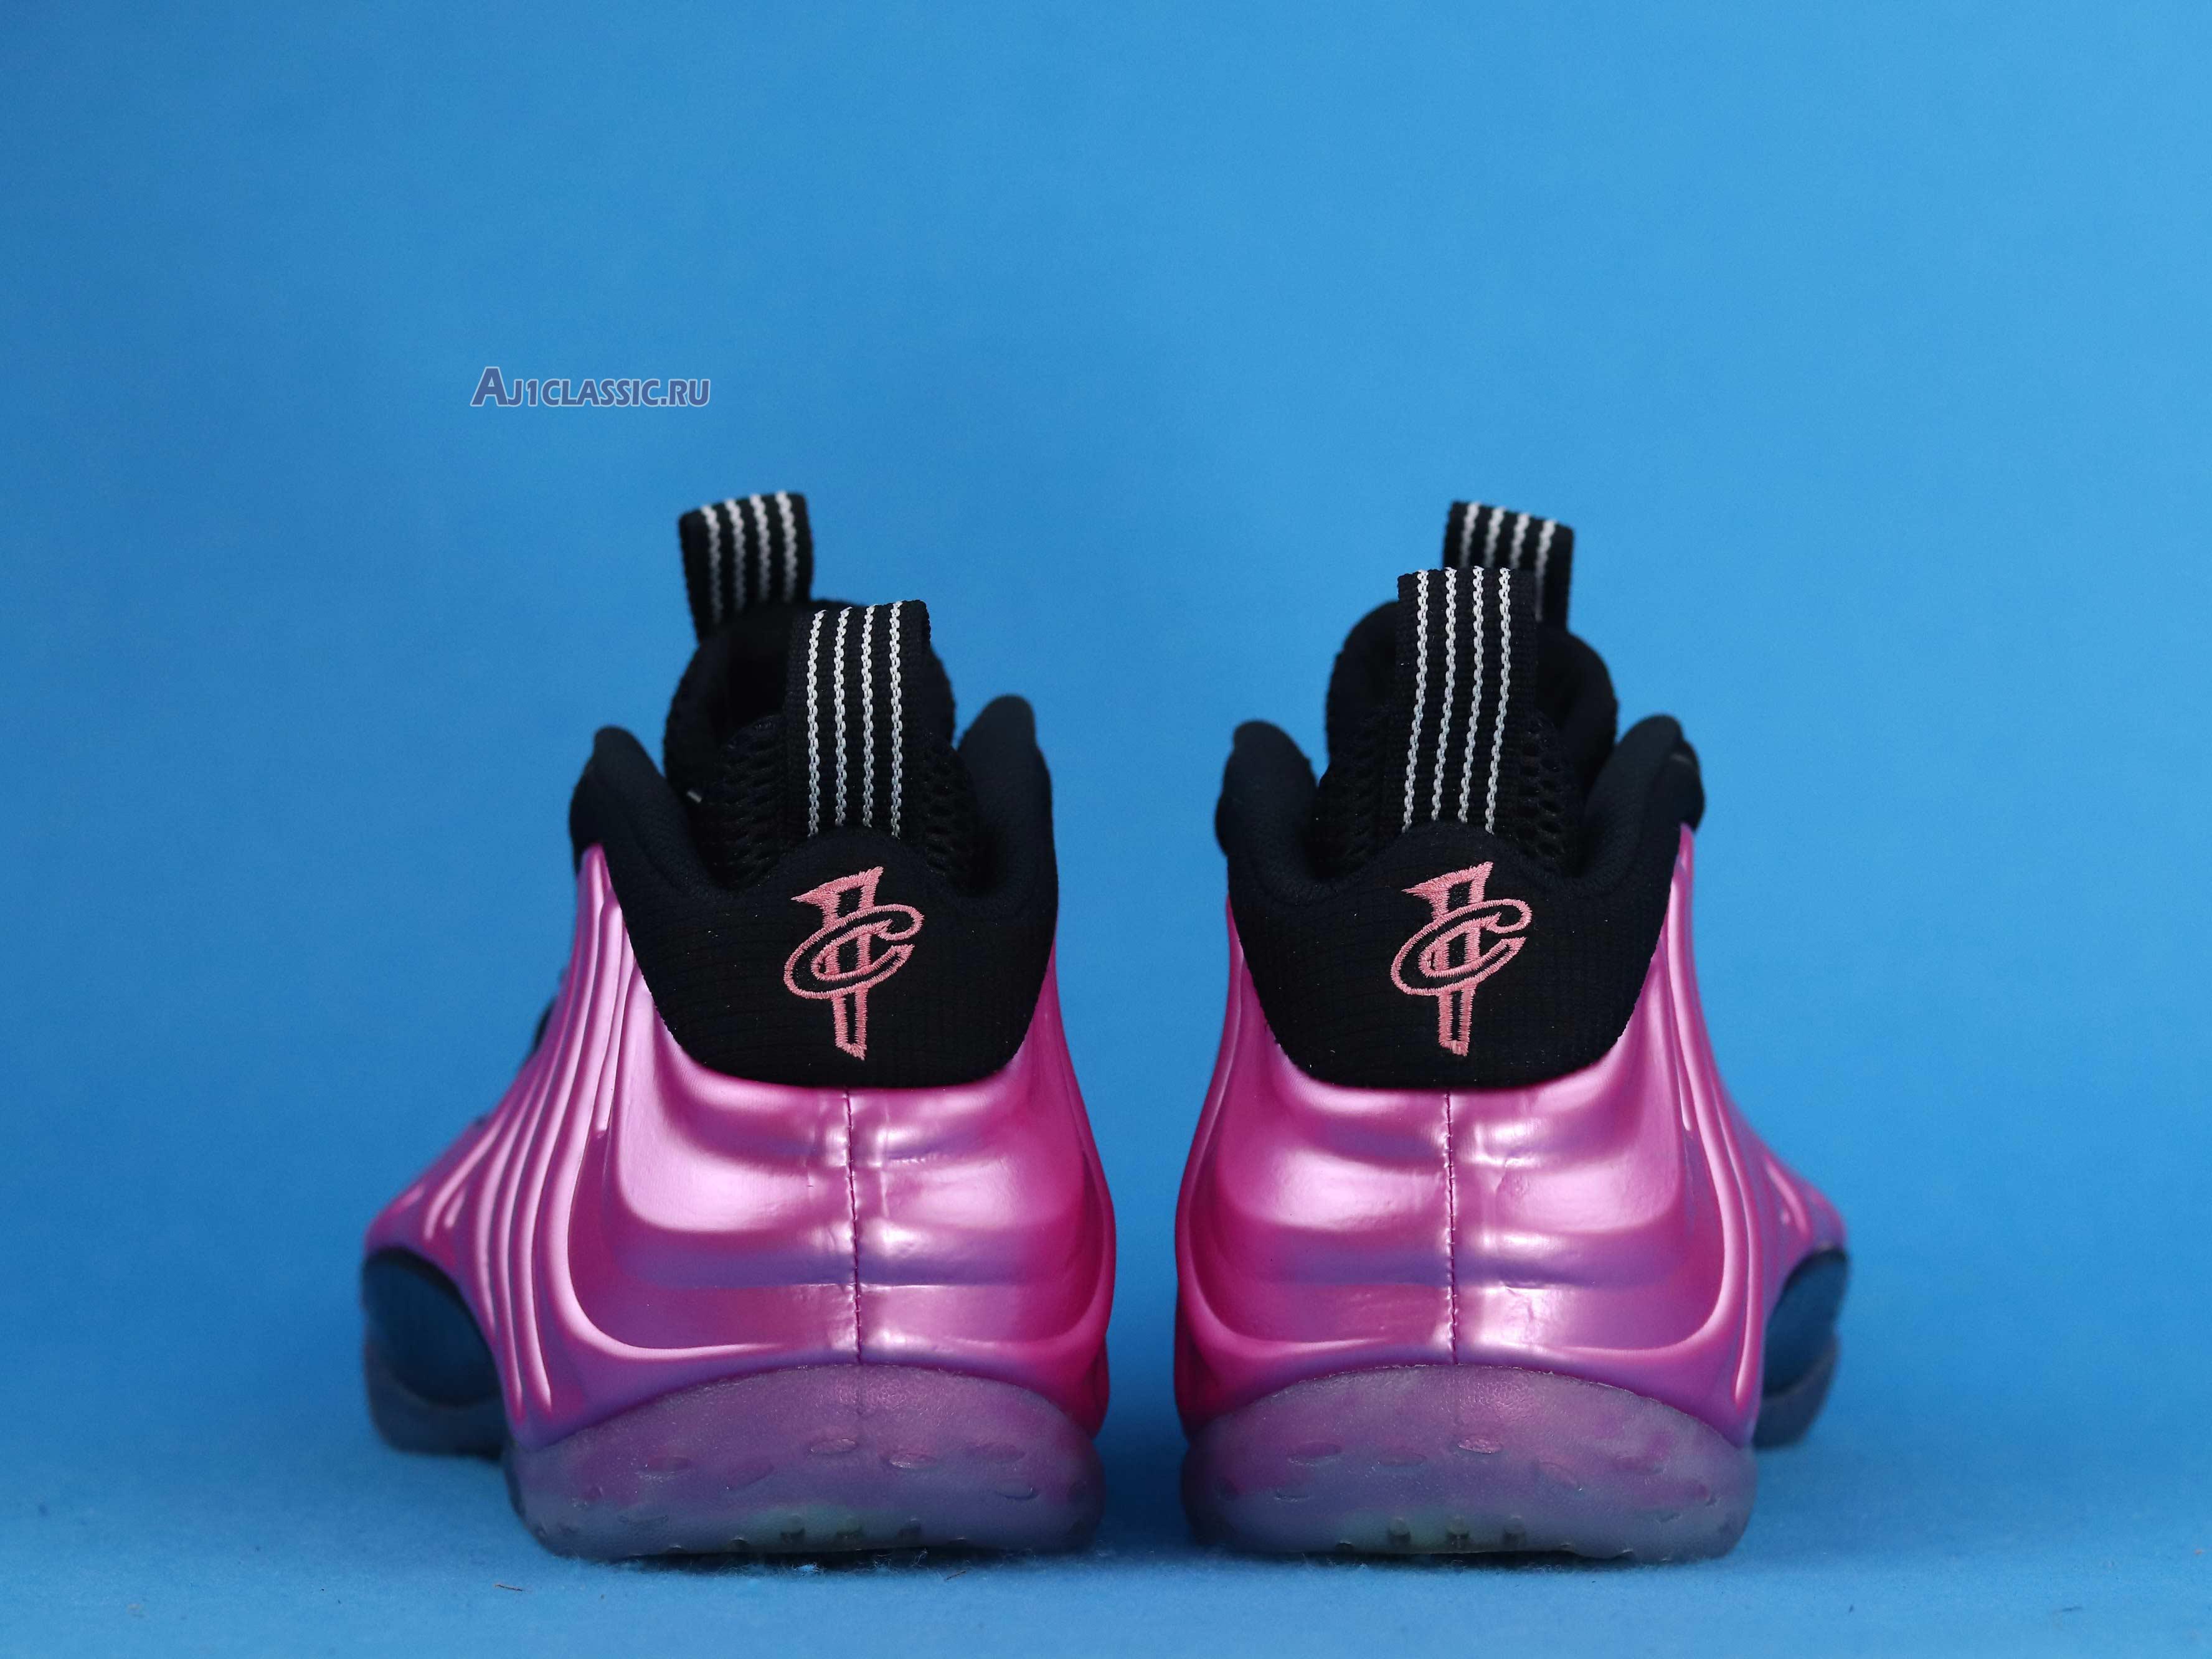 Nike Air Foamposite One "Pearlized Pink" 314996-600